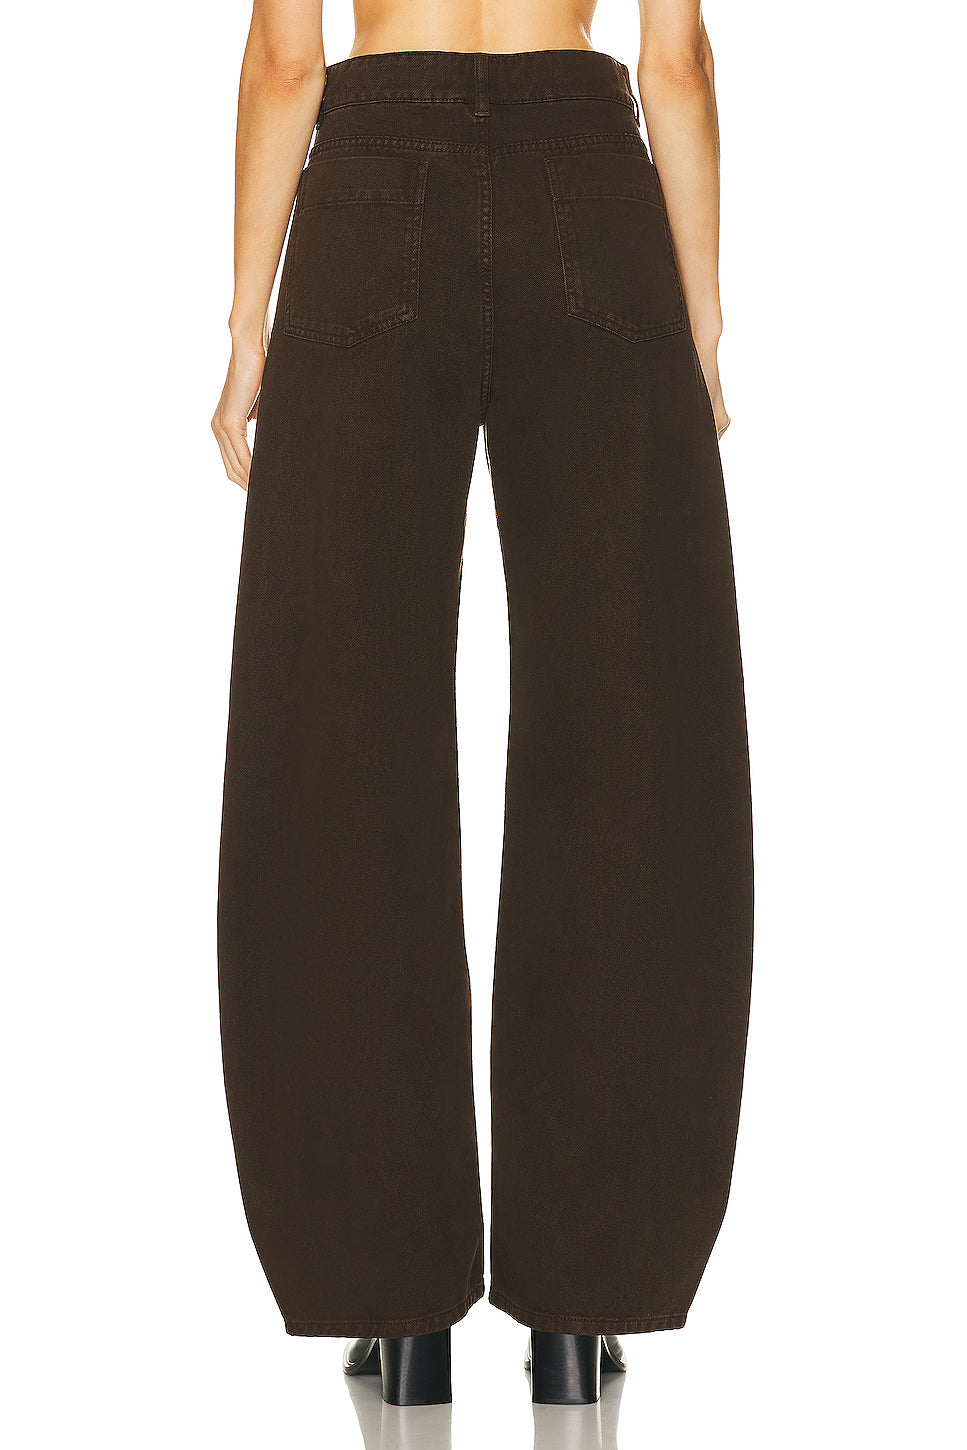 High Waisted Curved Pant